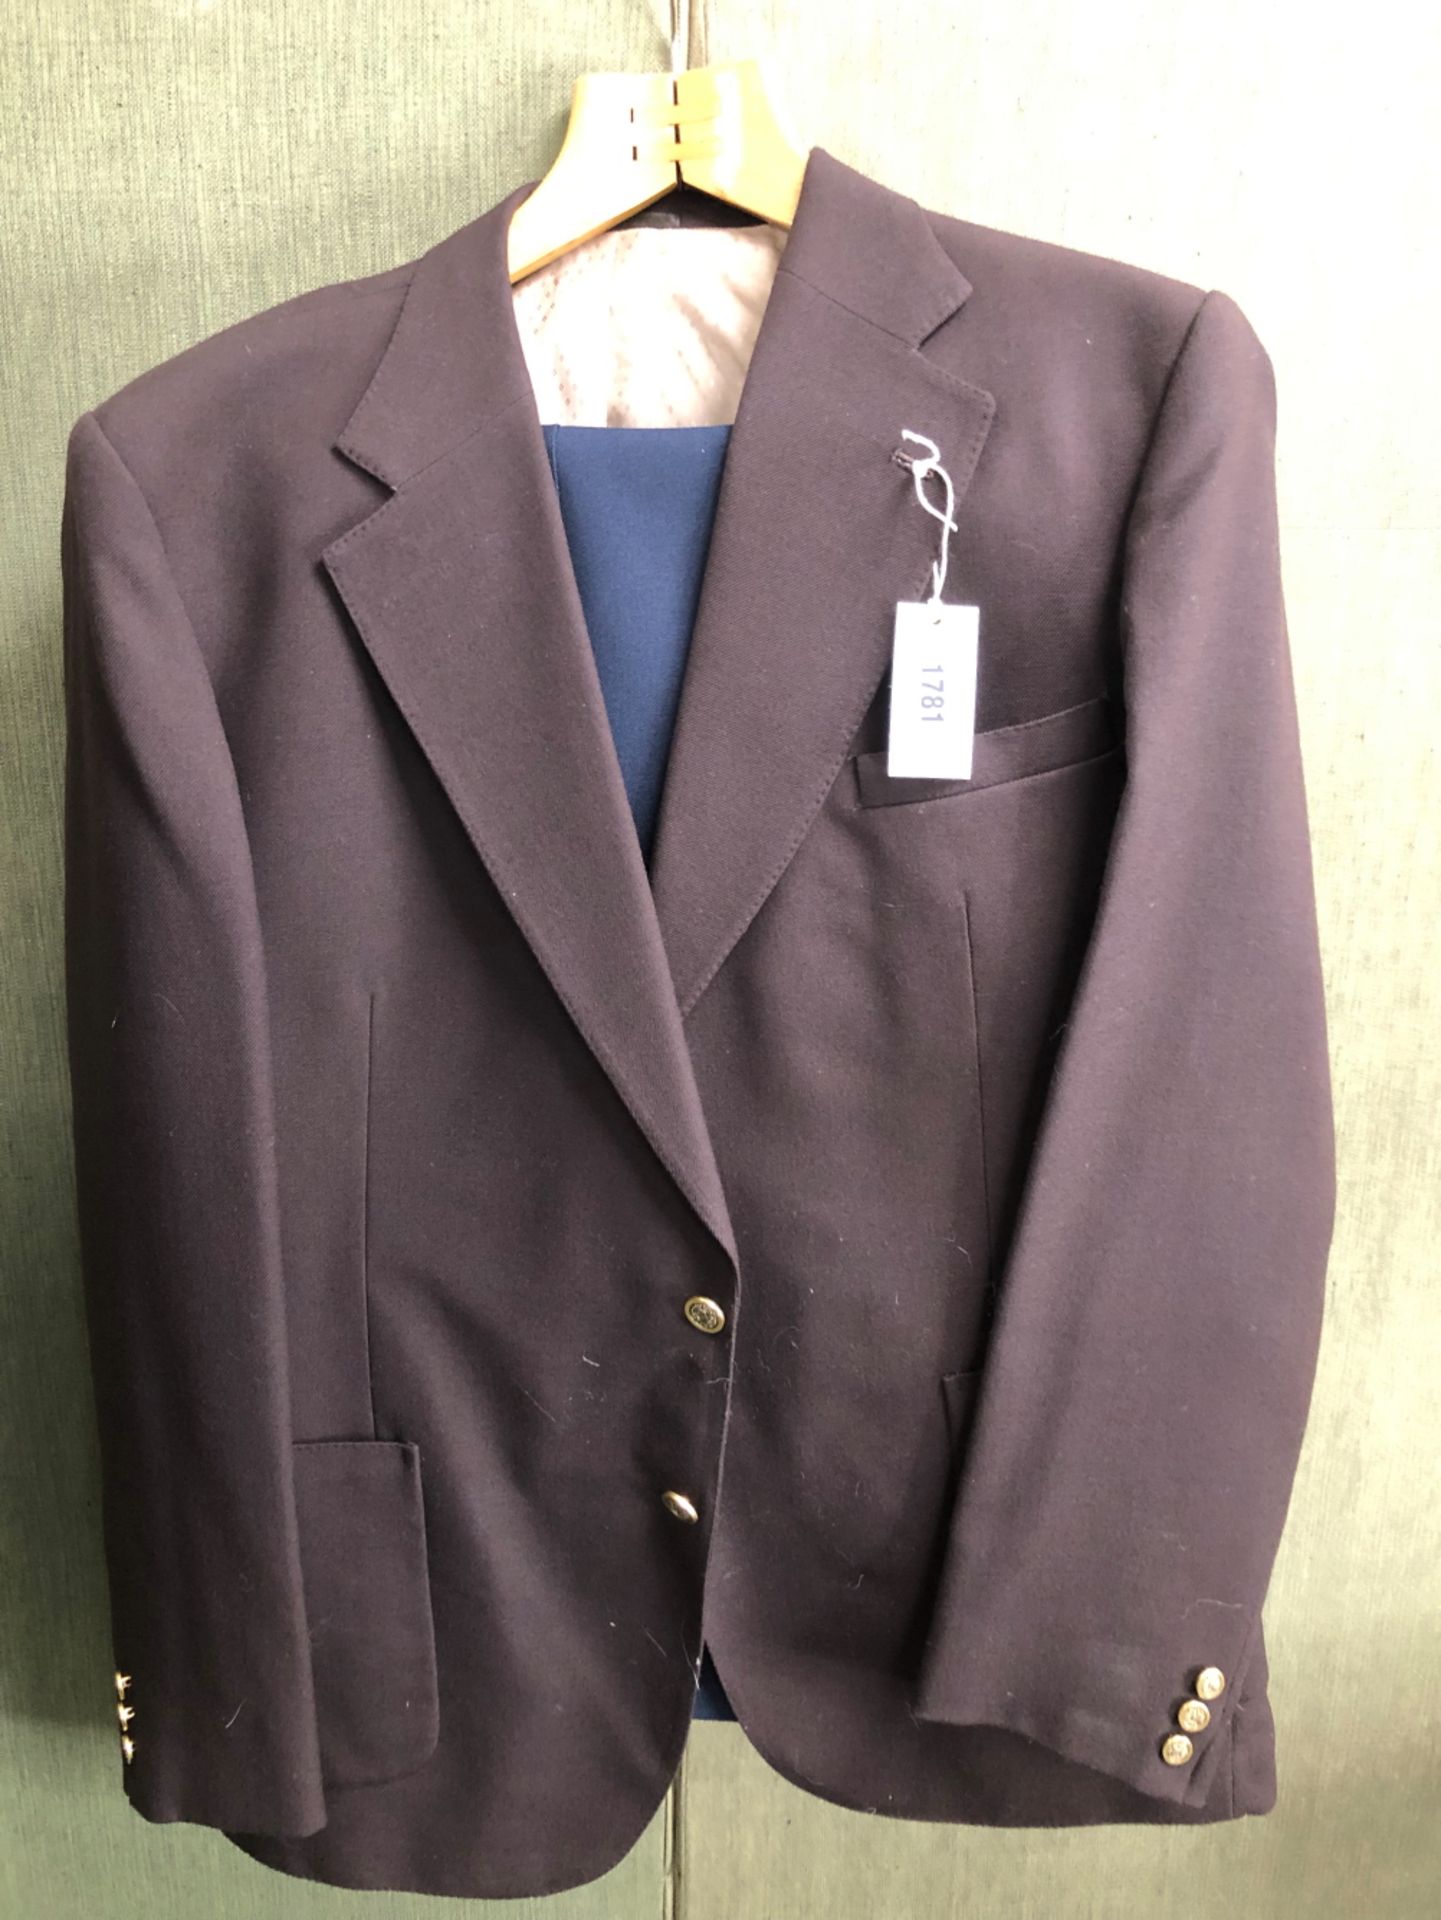 BLAZER AND TROUSERS: MAN IN WOOL, BROWN JACKET, CHEST 42", C&A BLUE TROUSERS, WAIST 40", A DOUBLE - Image 10 of 12